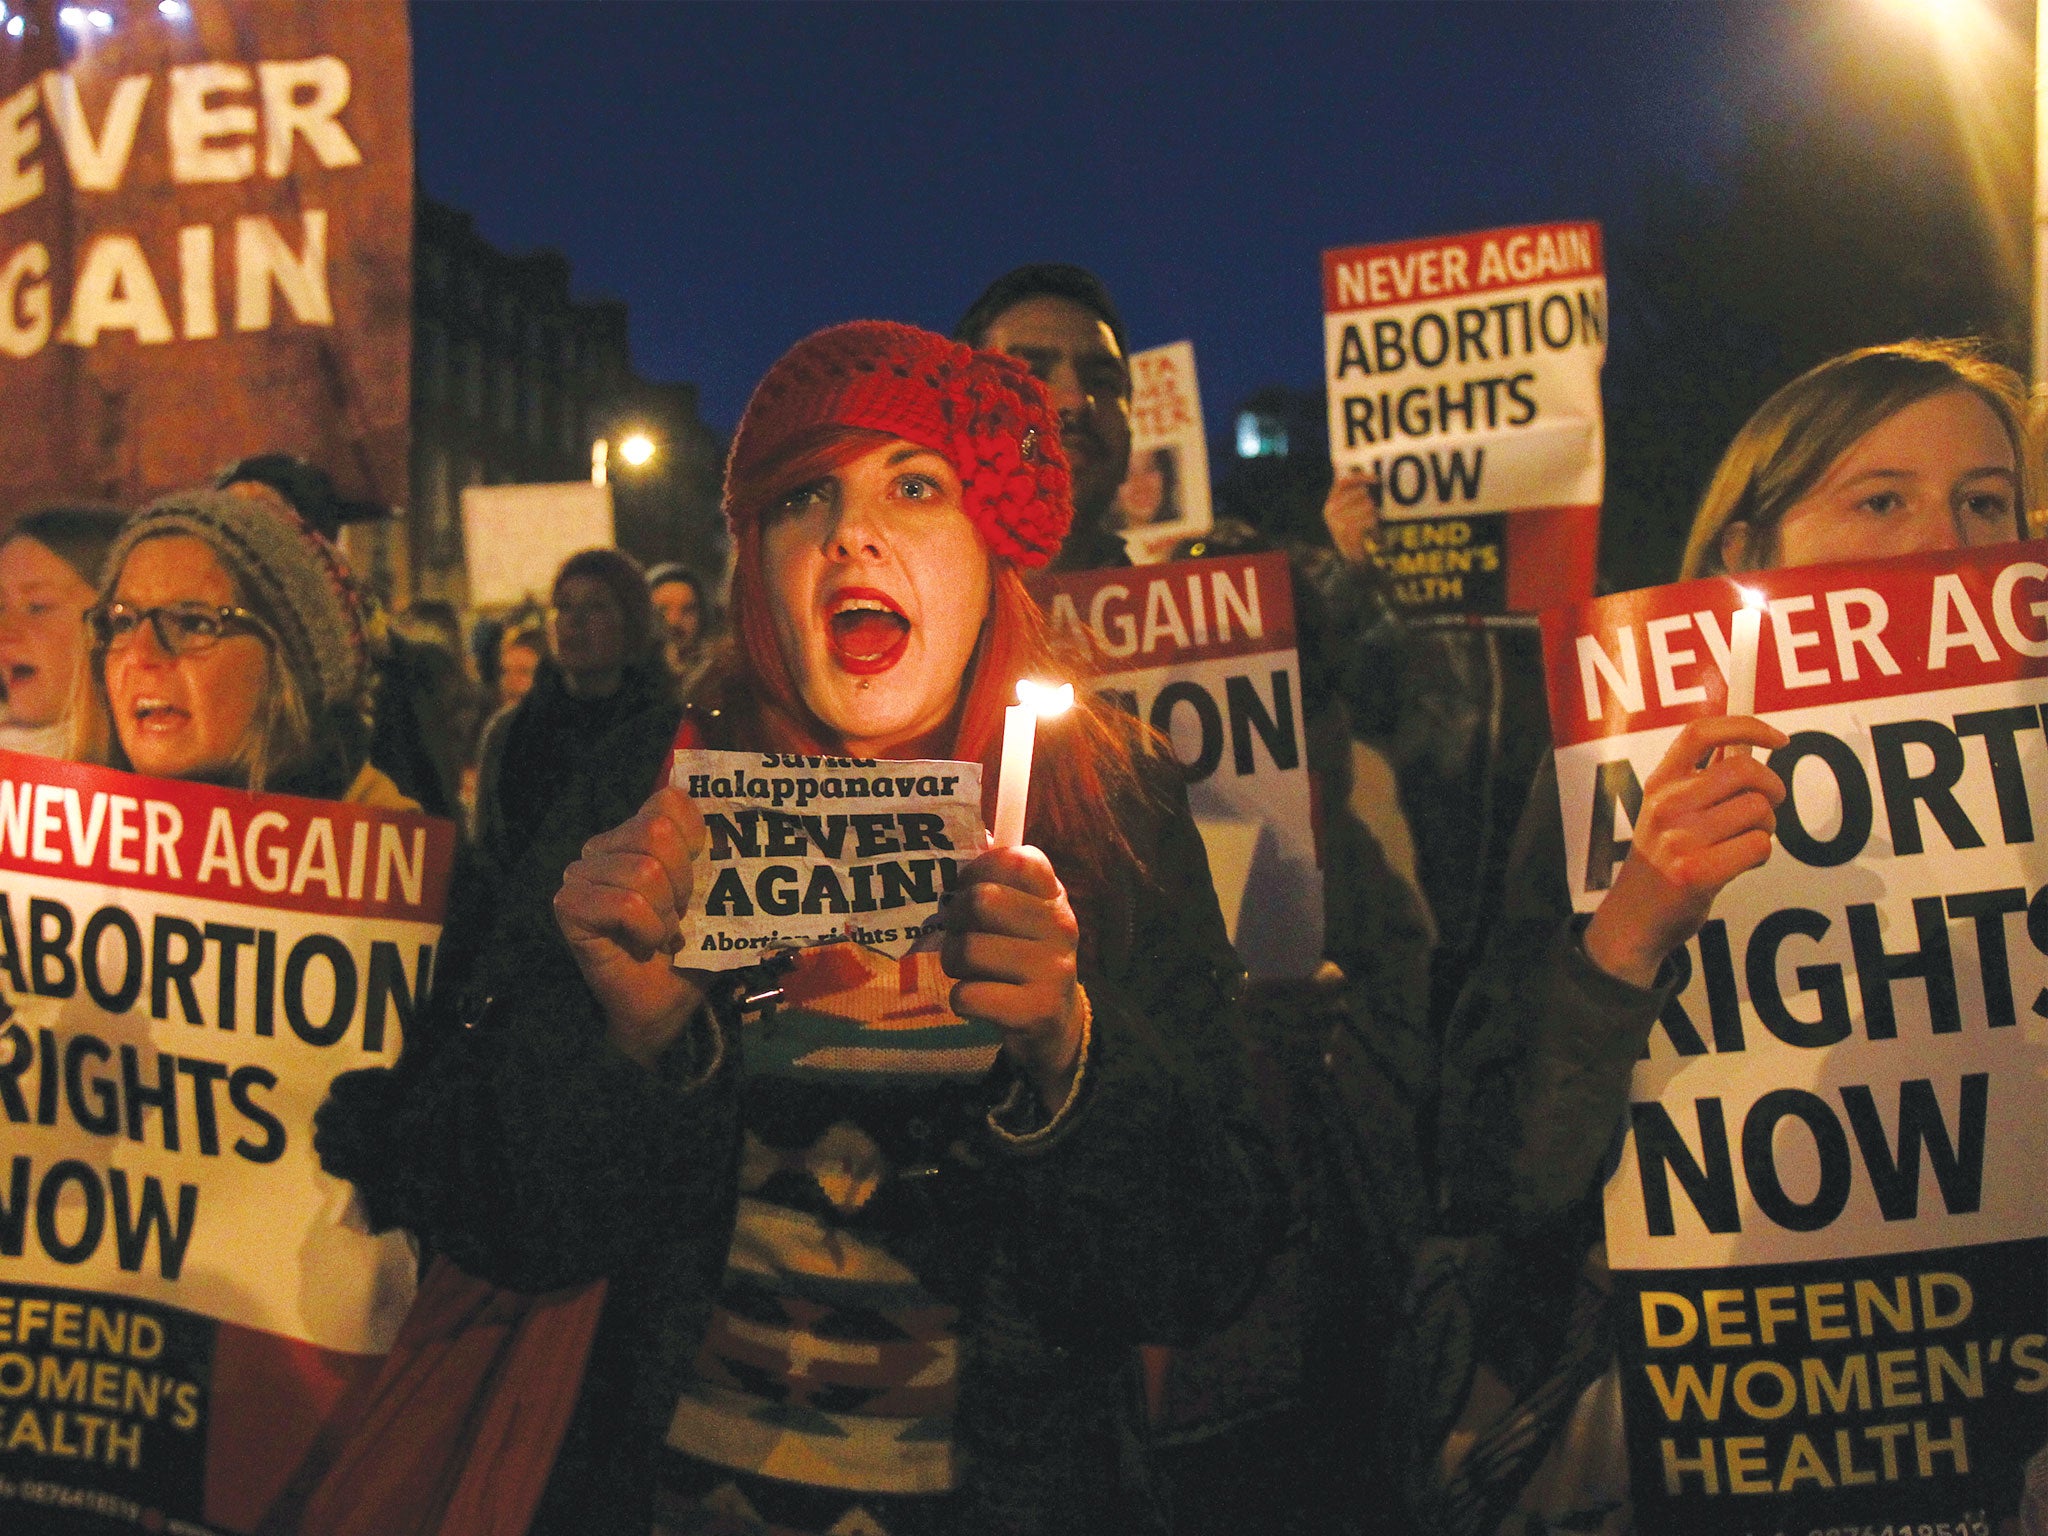 Protesters march to the Irish Parliament in memory of Indian Savita Halappanavar in Dublin, November 2012